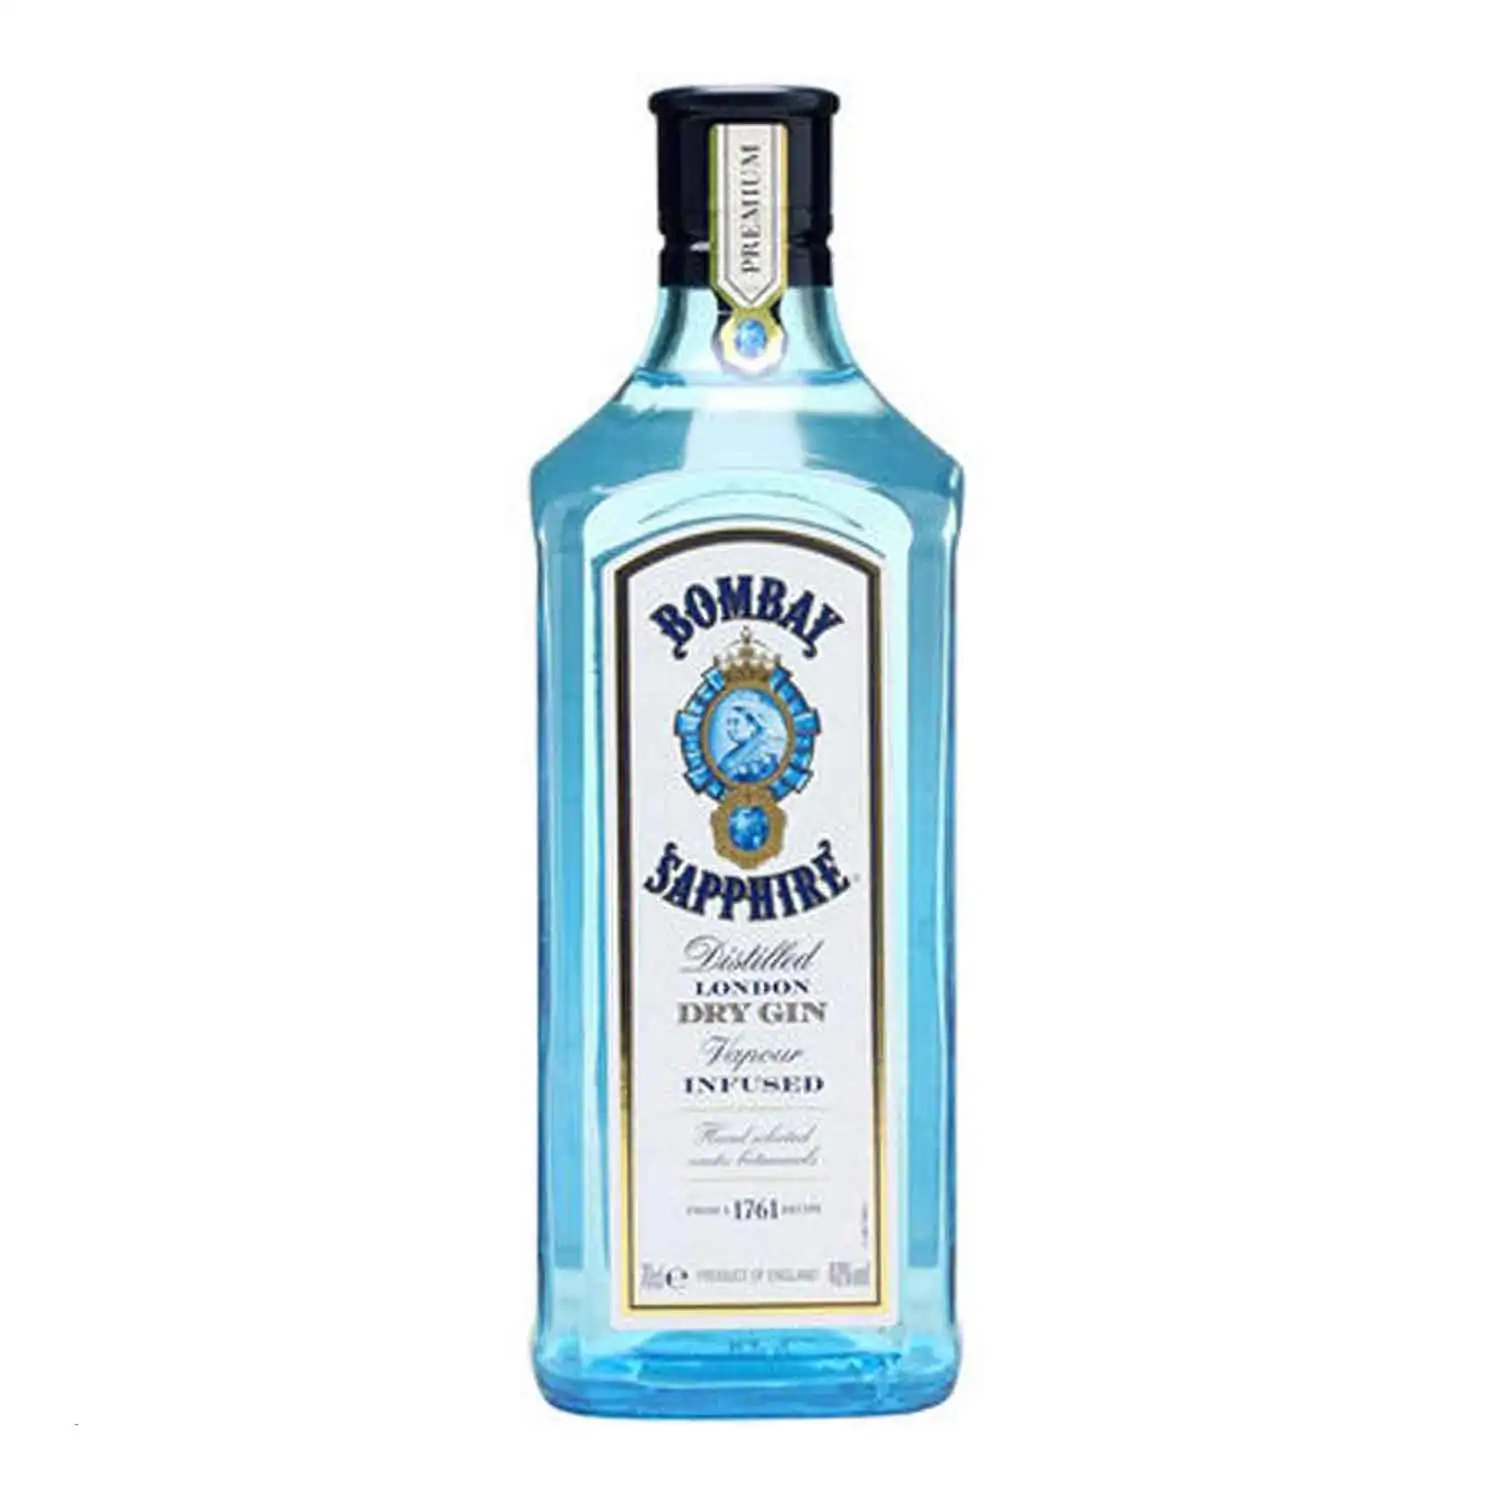 Bombay sapphire 70cl Alc 40% - Buy at Real Tobacco